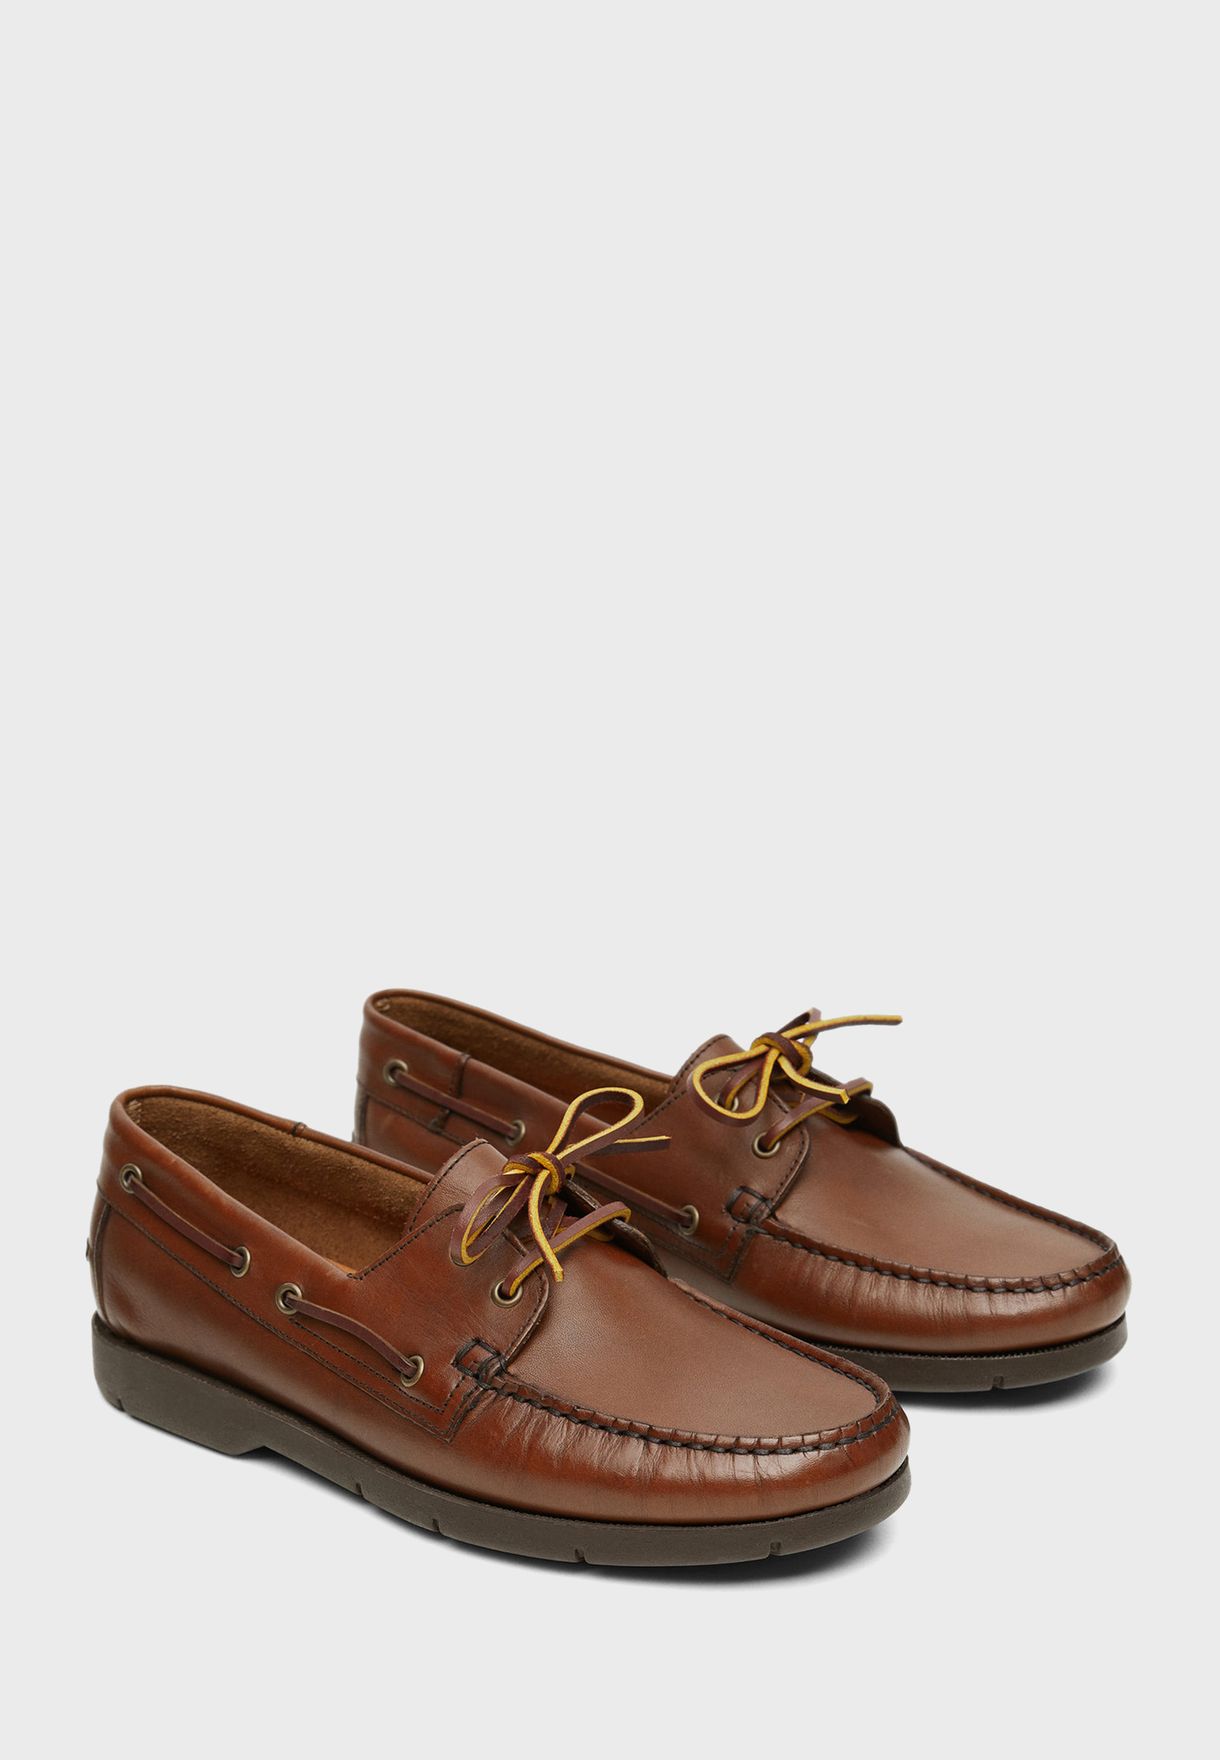 Round Toe Boat Shoes